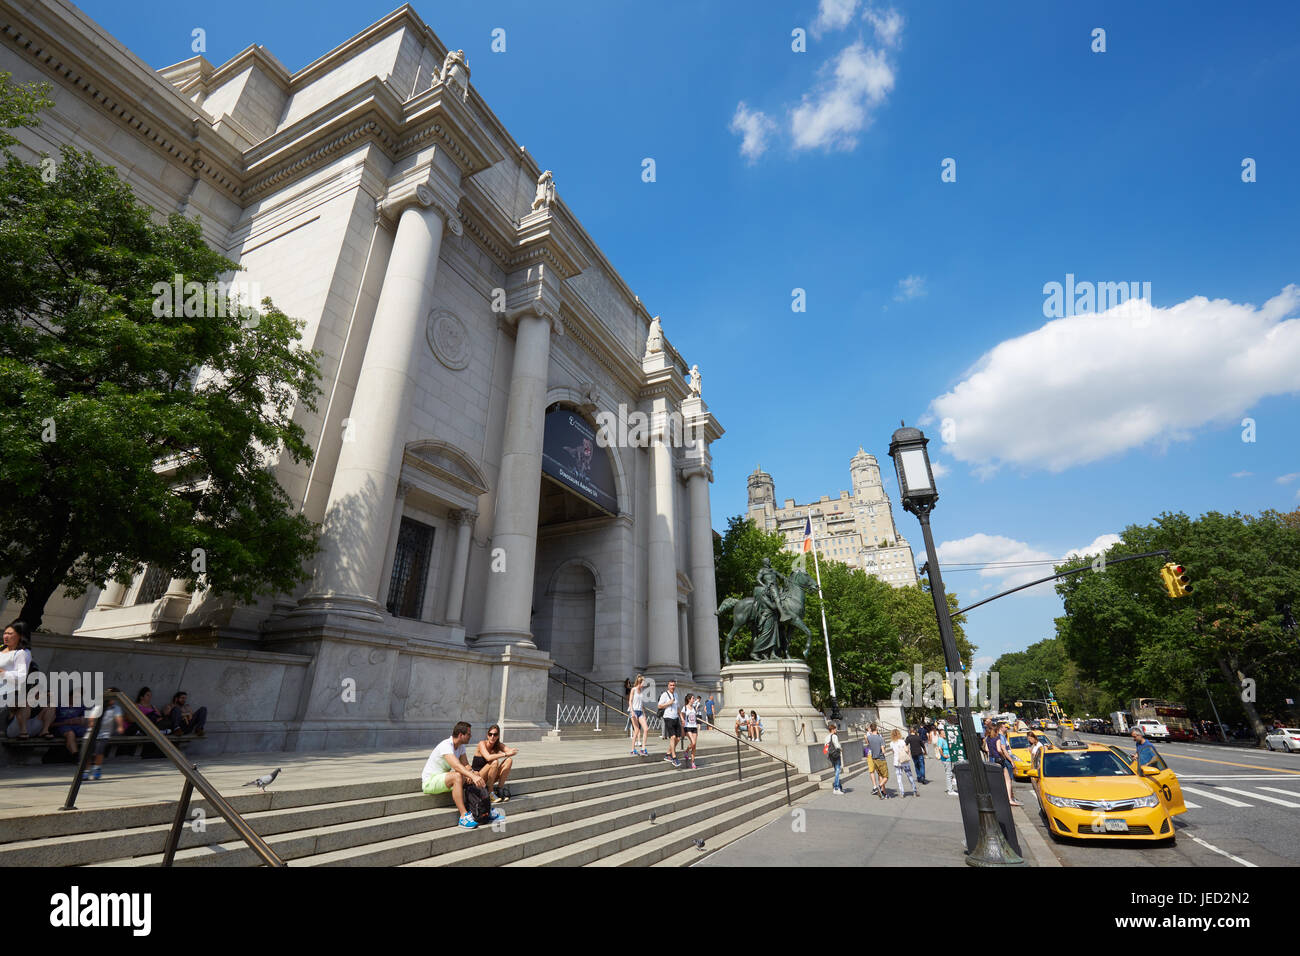 American Museum of Natural History building facade with people in a sunny day, blue sky in New York Stock Photo